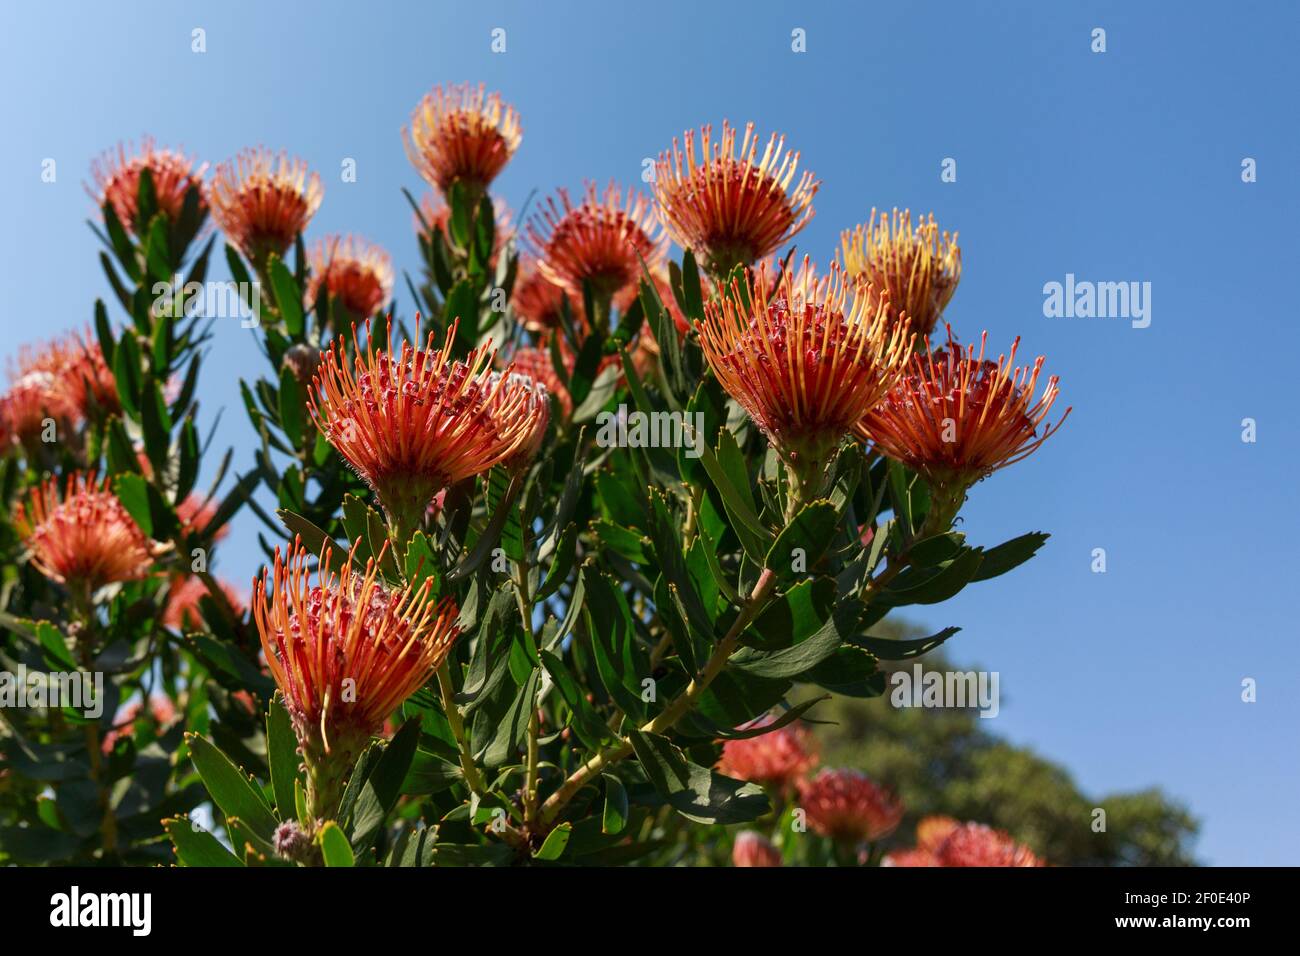 Pincushion Proteas or Leucospermum Cordifolium with blue sky in the background, Kirstenbosch National Botanical Garden, Cape Town, South Africa Stock Photo